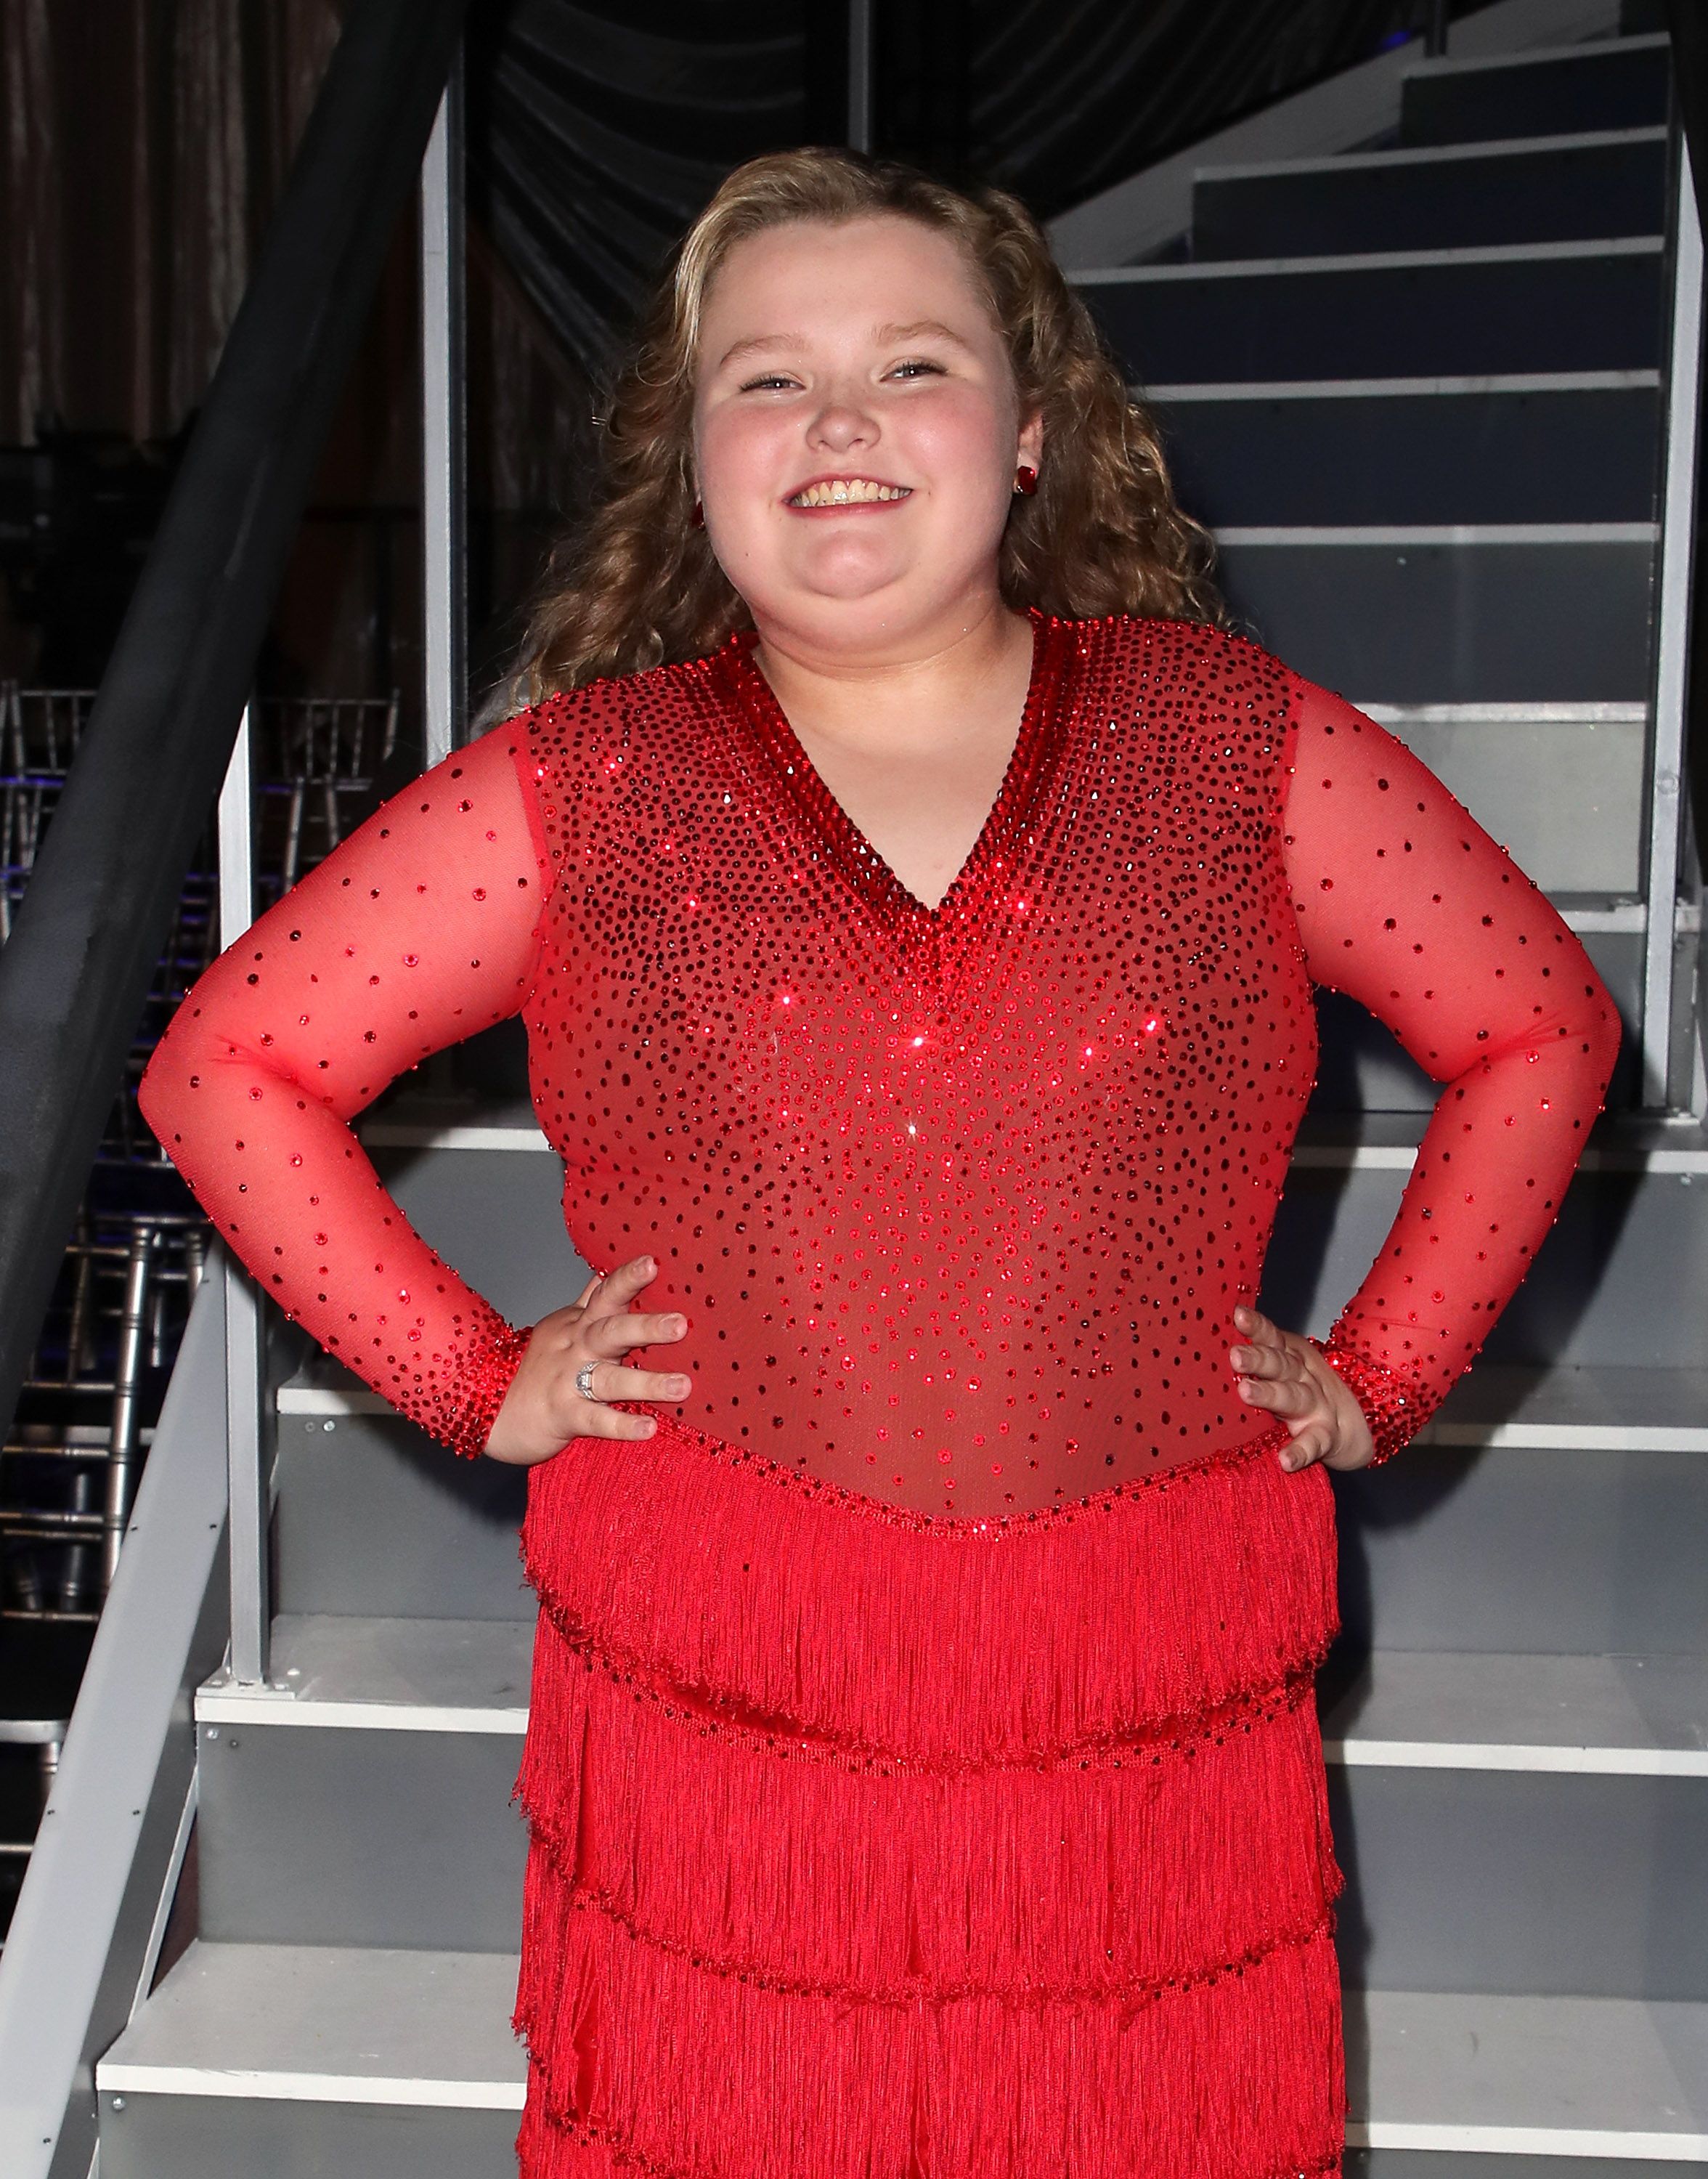 Alana Thompson posing during "Dancing with the Stars" Season 27 at CBS Television City in Los Angeles, California | Photo: David Livingston/Getty Images